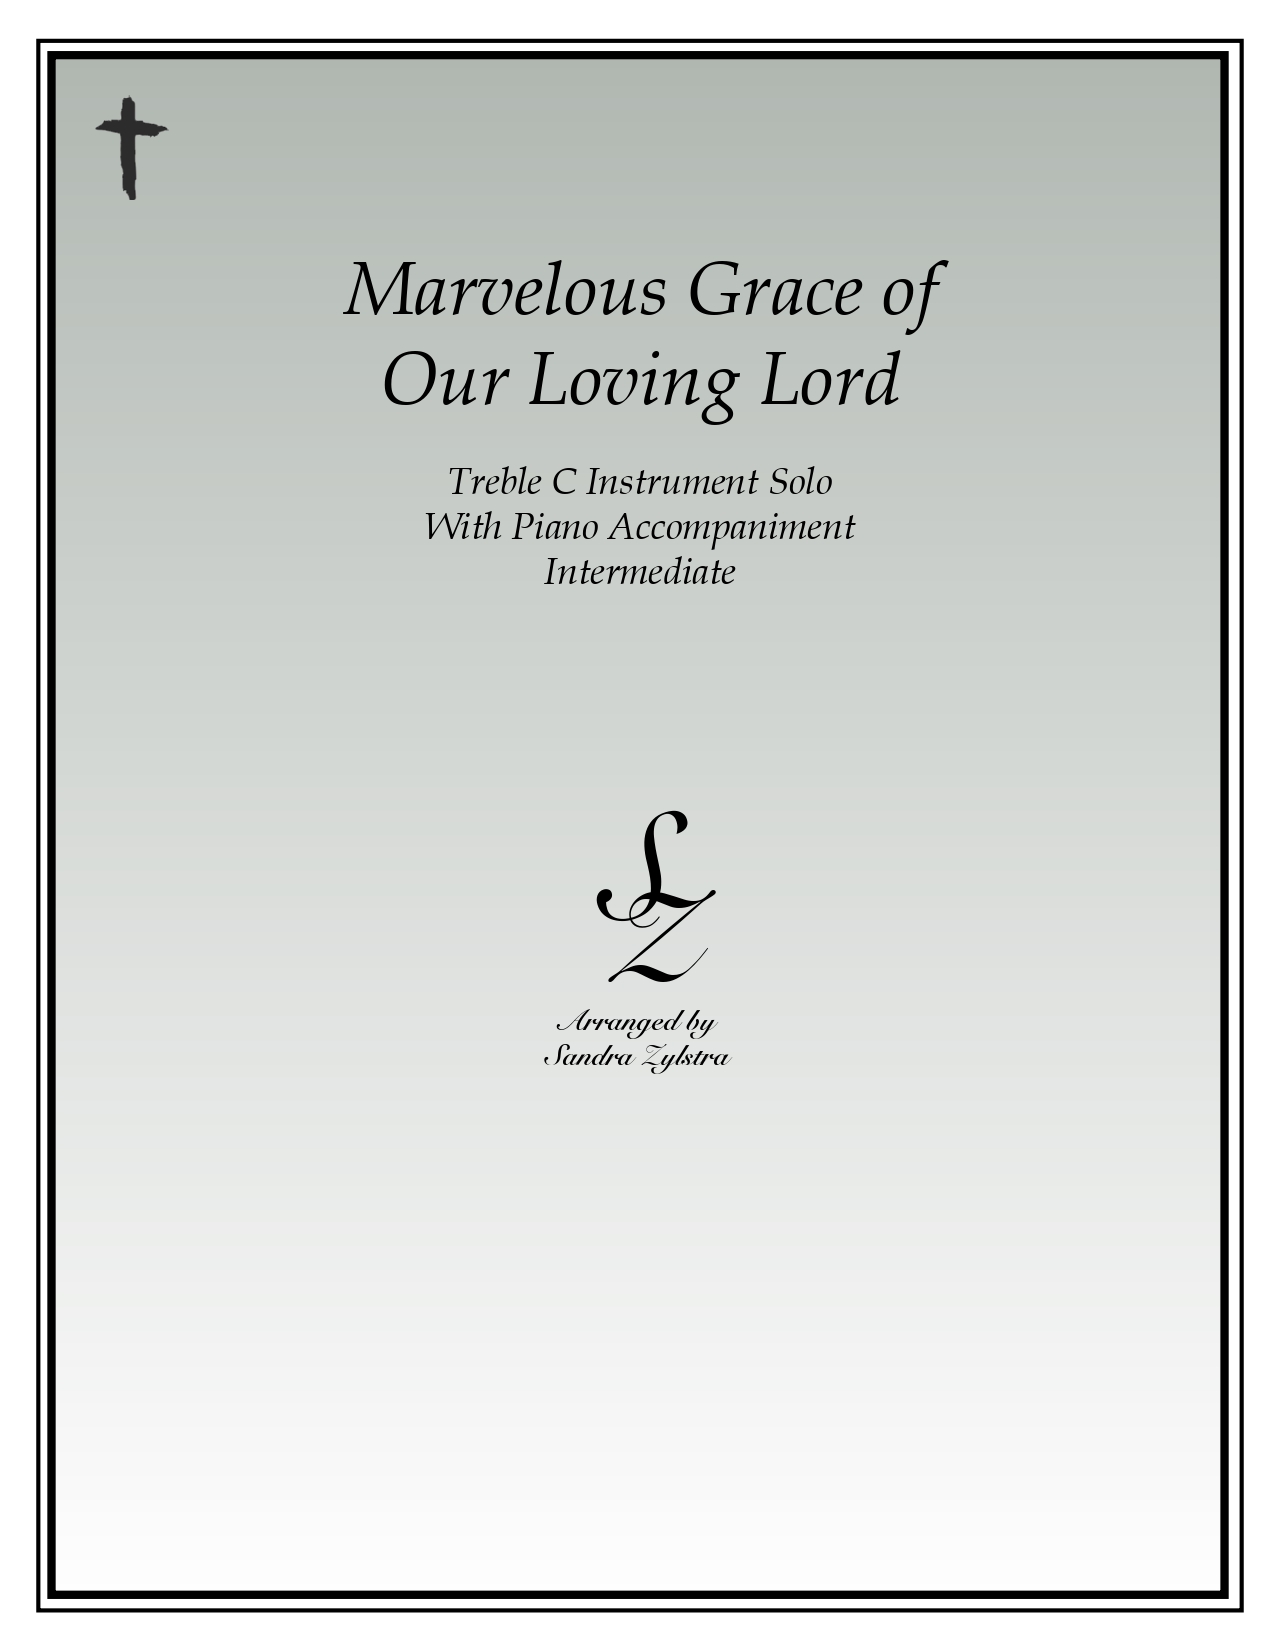 Marvelous Grace Of Our Loving Lord treble C instrument solo part cover page 00011